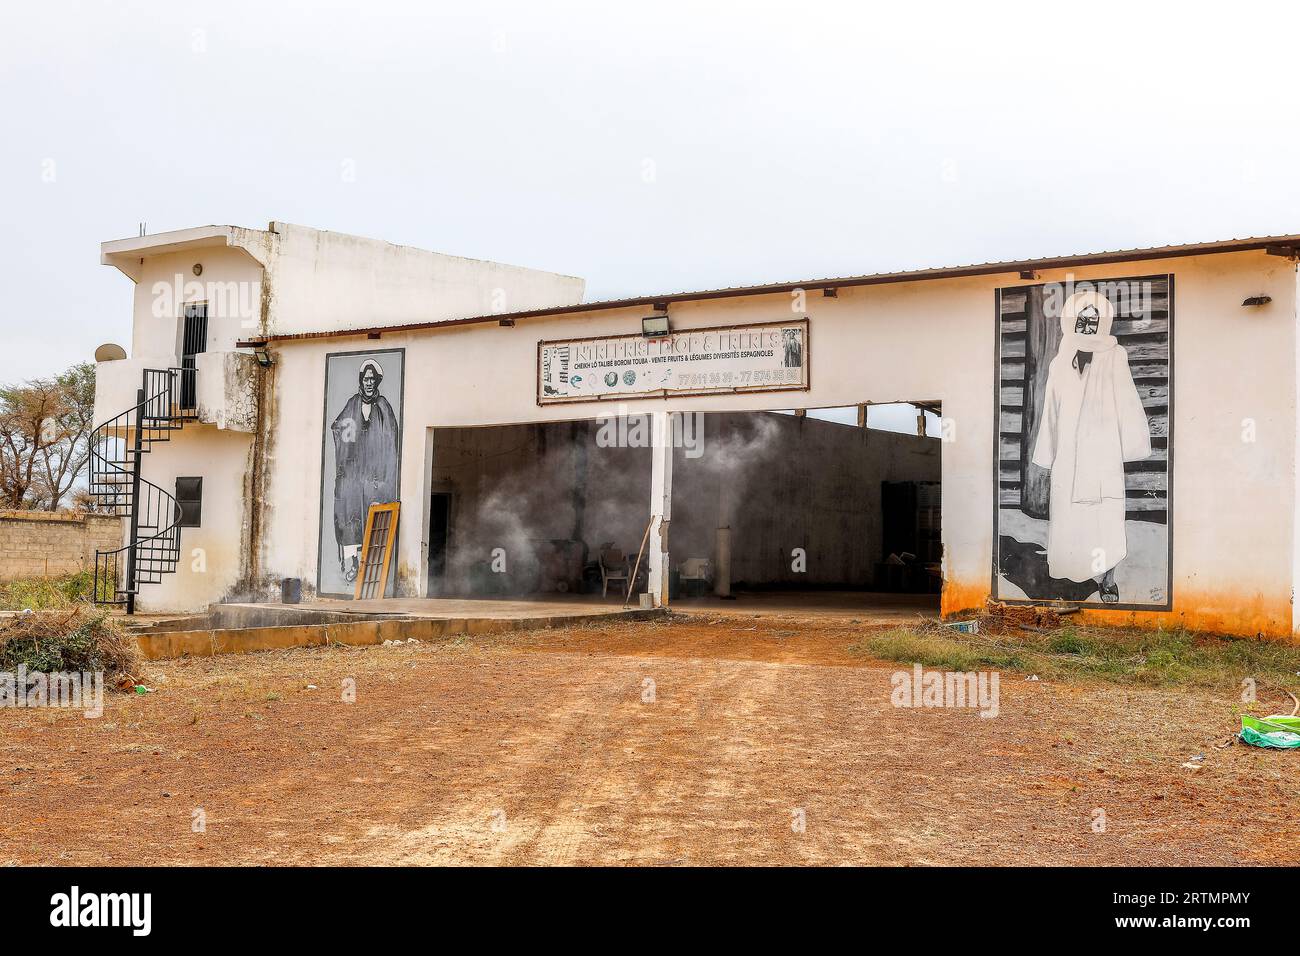 Warehouse with pictures of mouride muslim spiritual leaders in Tawafall, Senegal Stock Photo